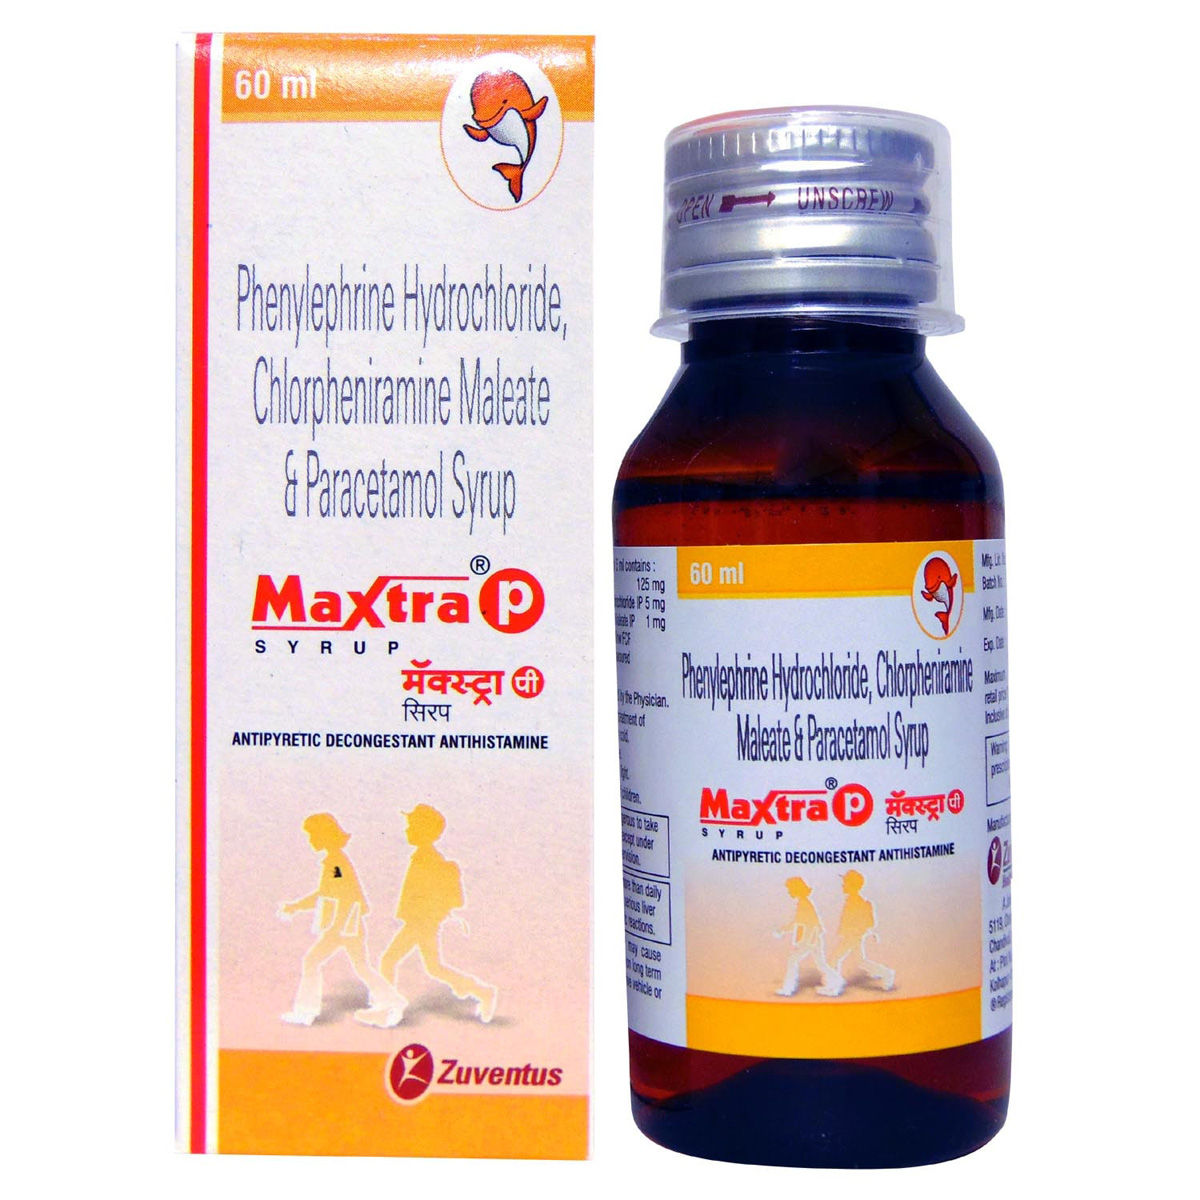 Maxtra P Syrup 60 ml Price, Uses, Side Effects, Composition - Apollo  Pharmacy